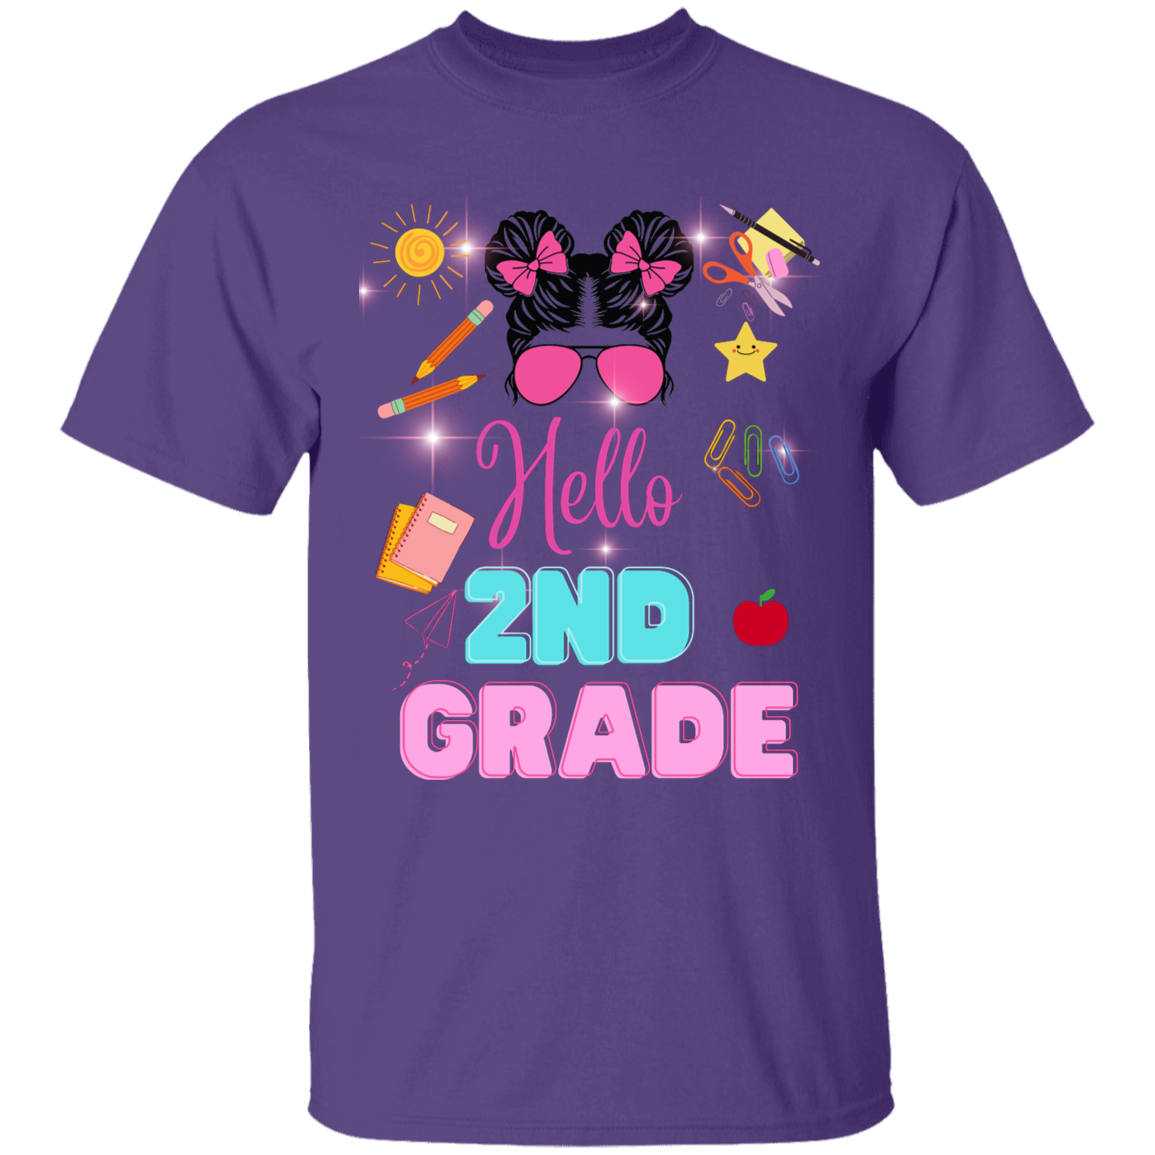 youth Back-to-school graphic tees 100% Cotton T-Shirt